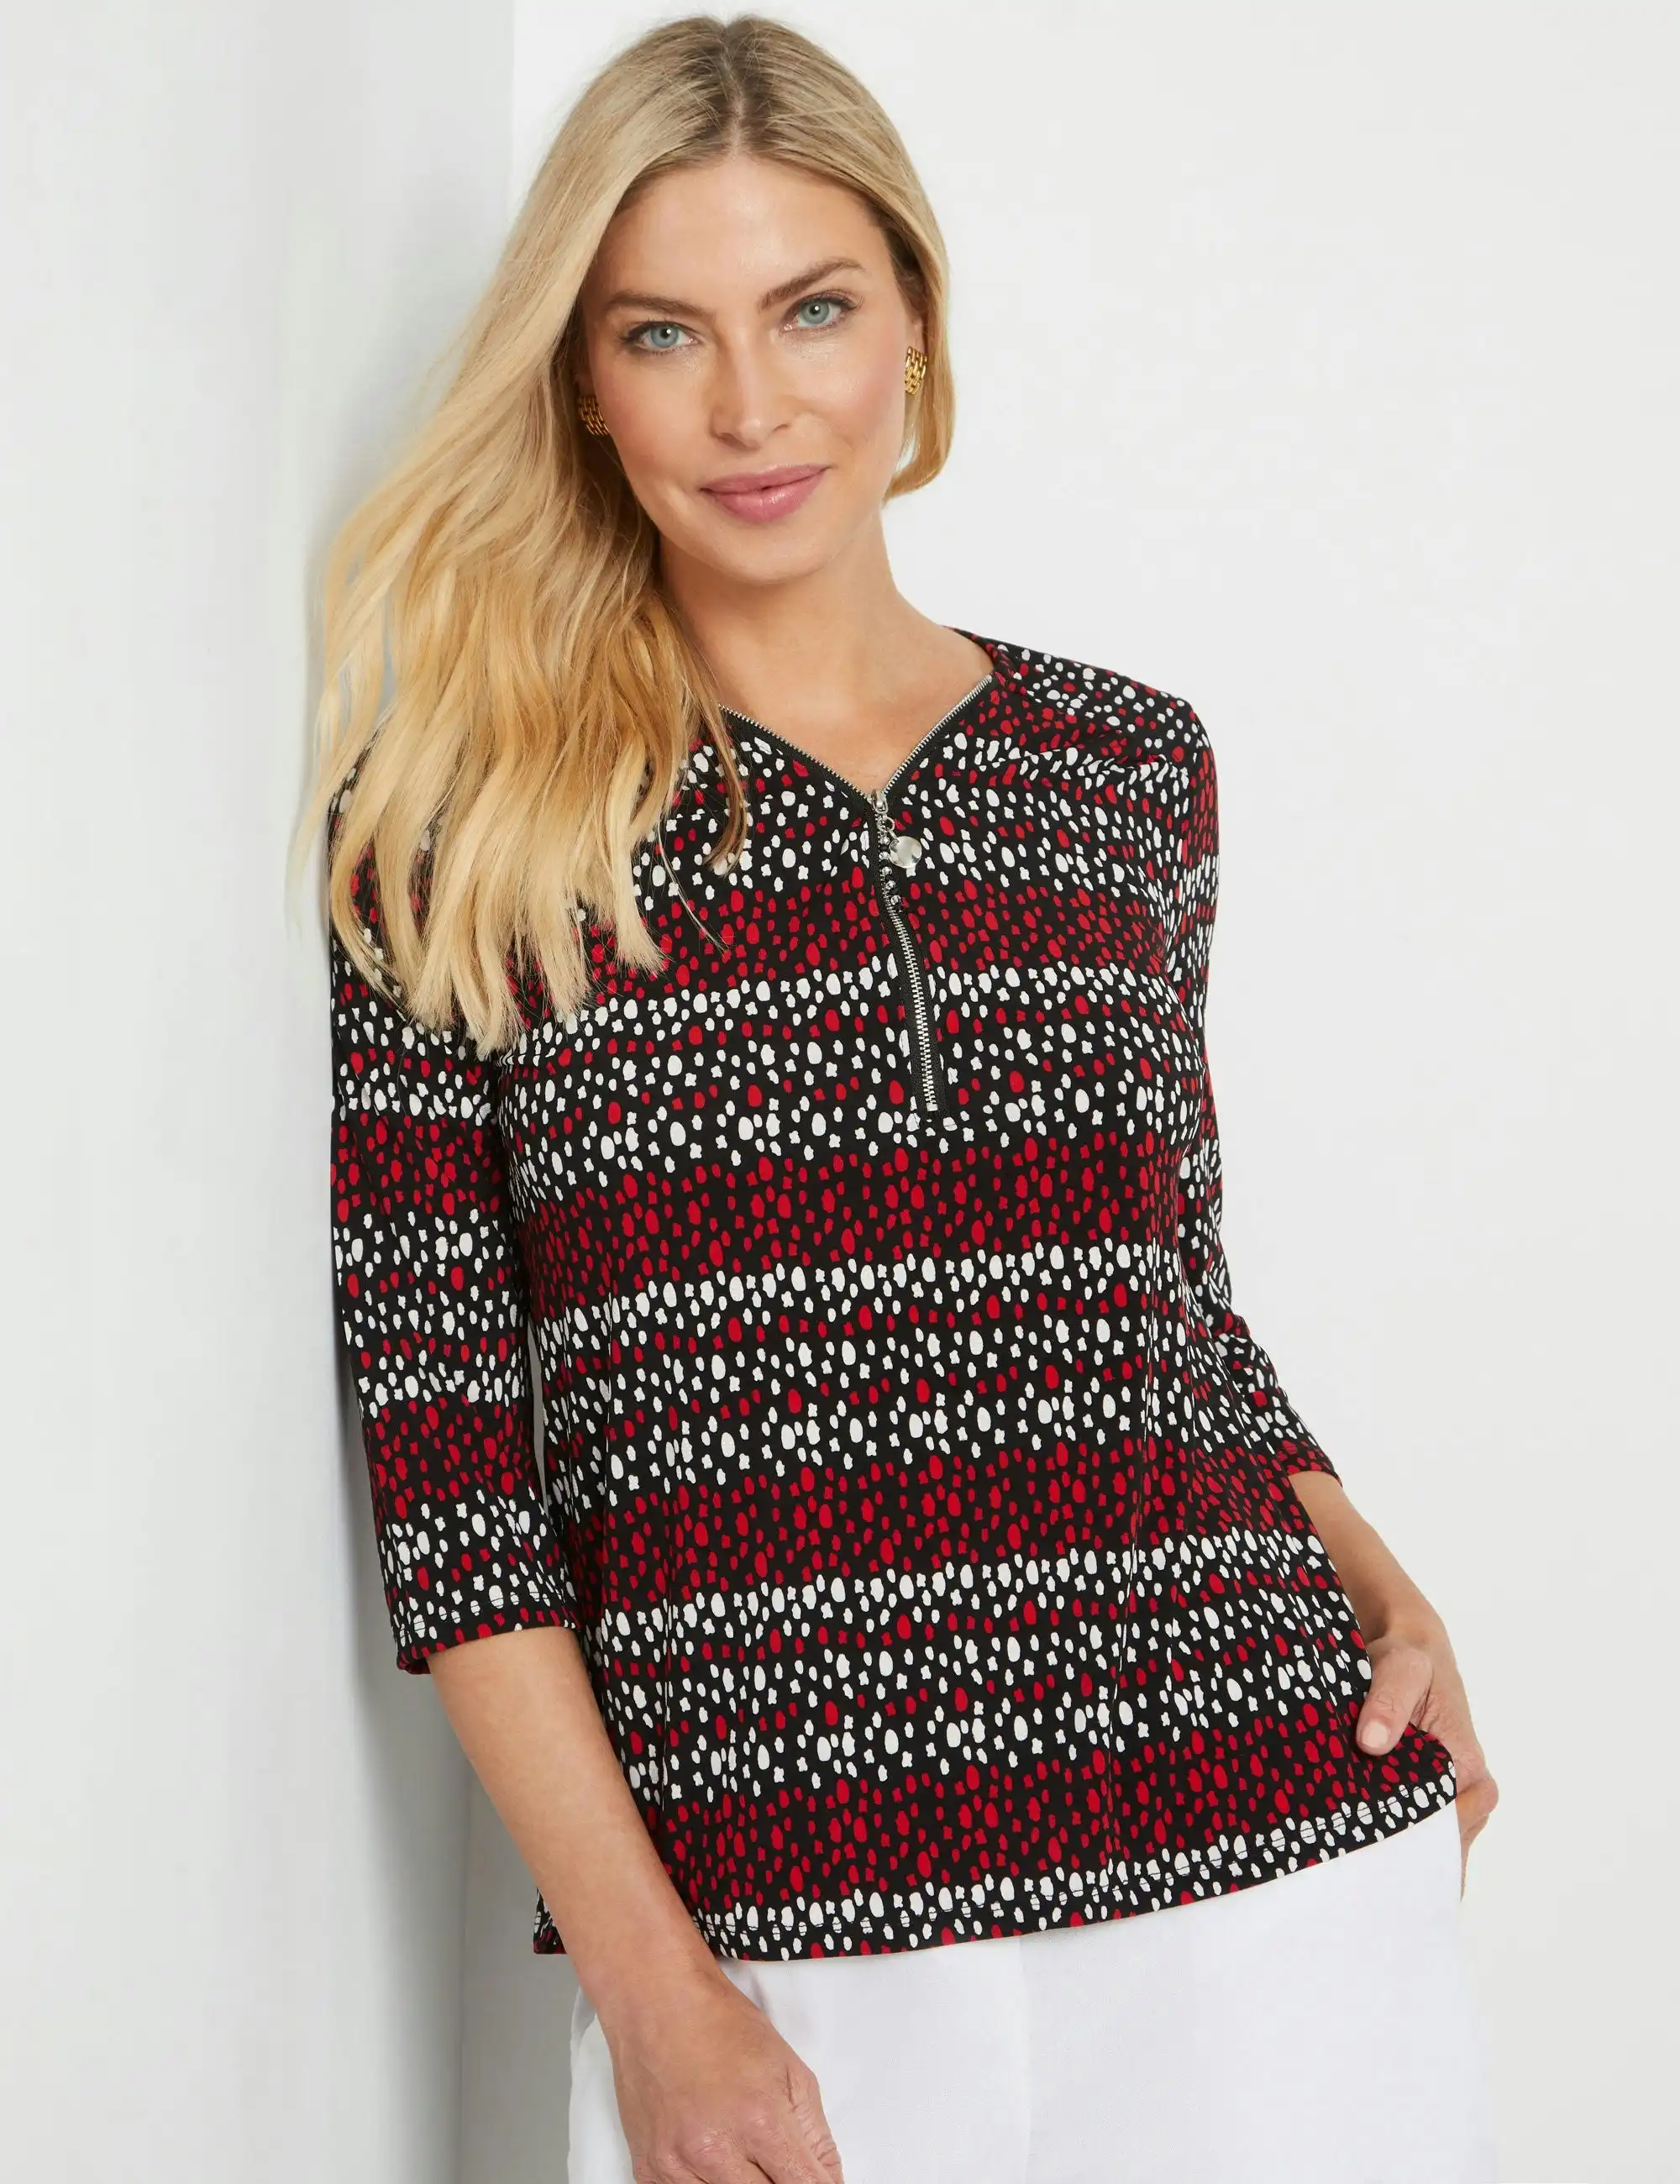 Noni B Knitwear Zipped Front Top (Jester Red)